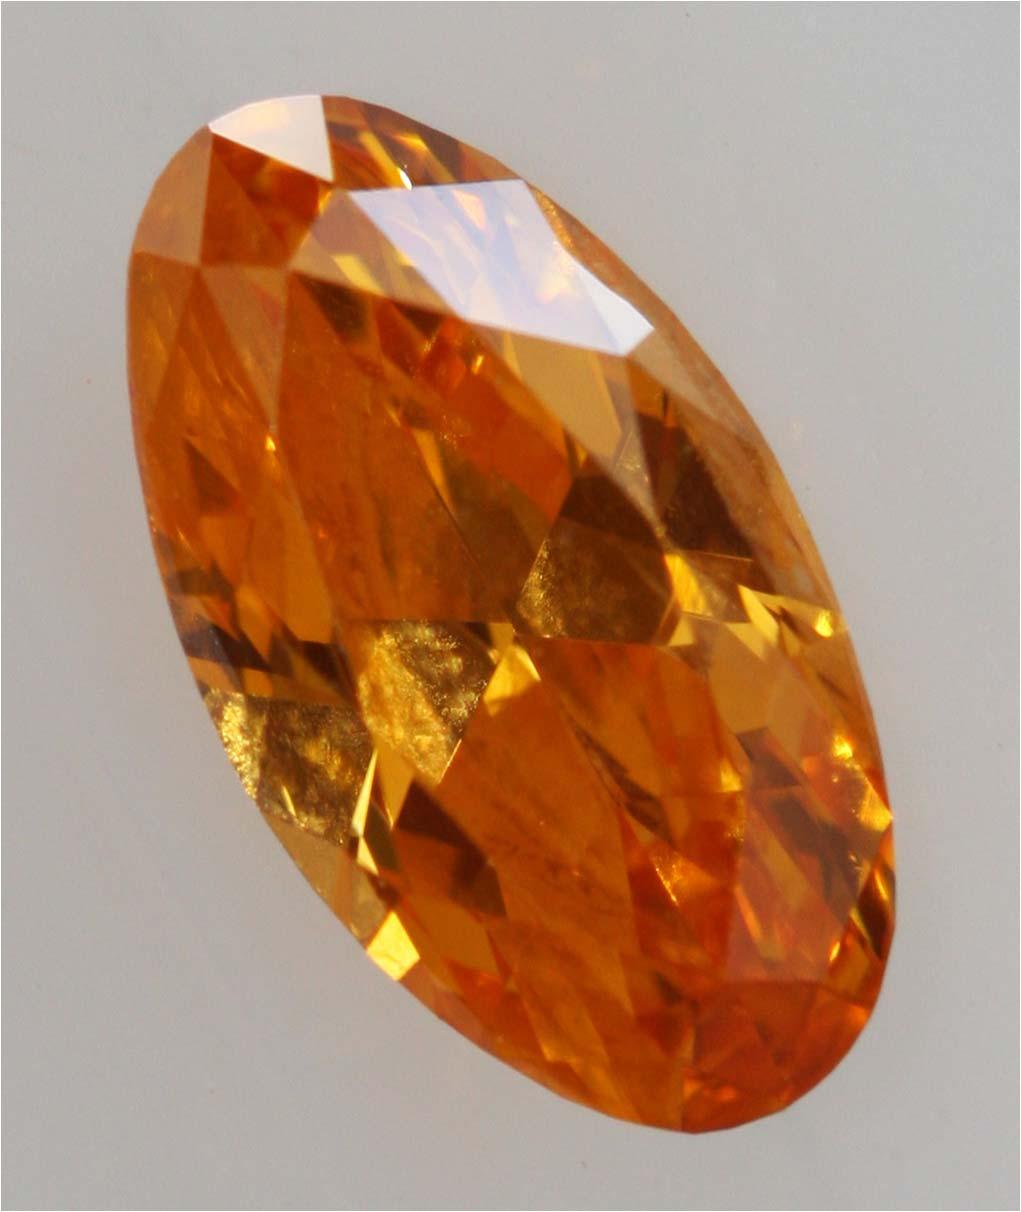 Orange Diamonds Nitrogen is thought to be involved in the color process of Orange Diamond, but there has been no conclusive scientific evidence.